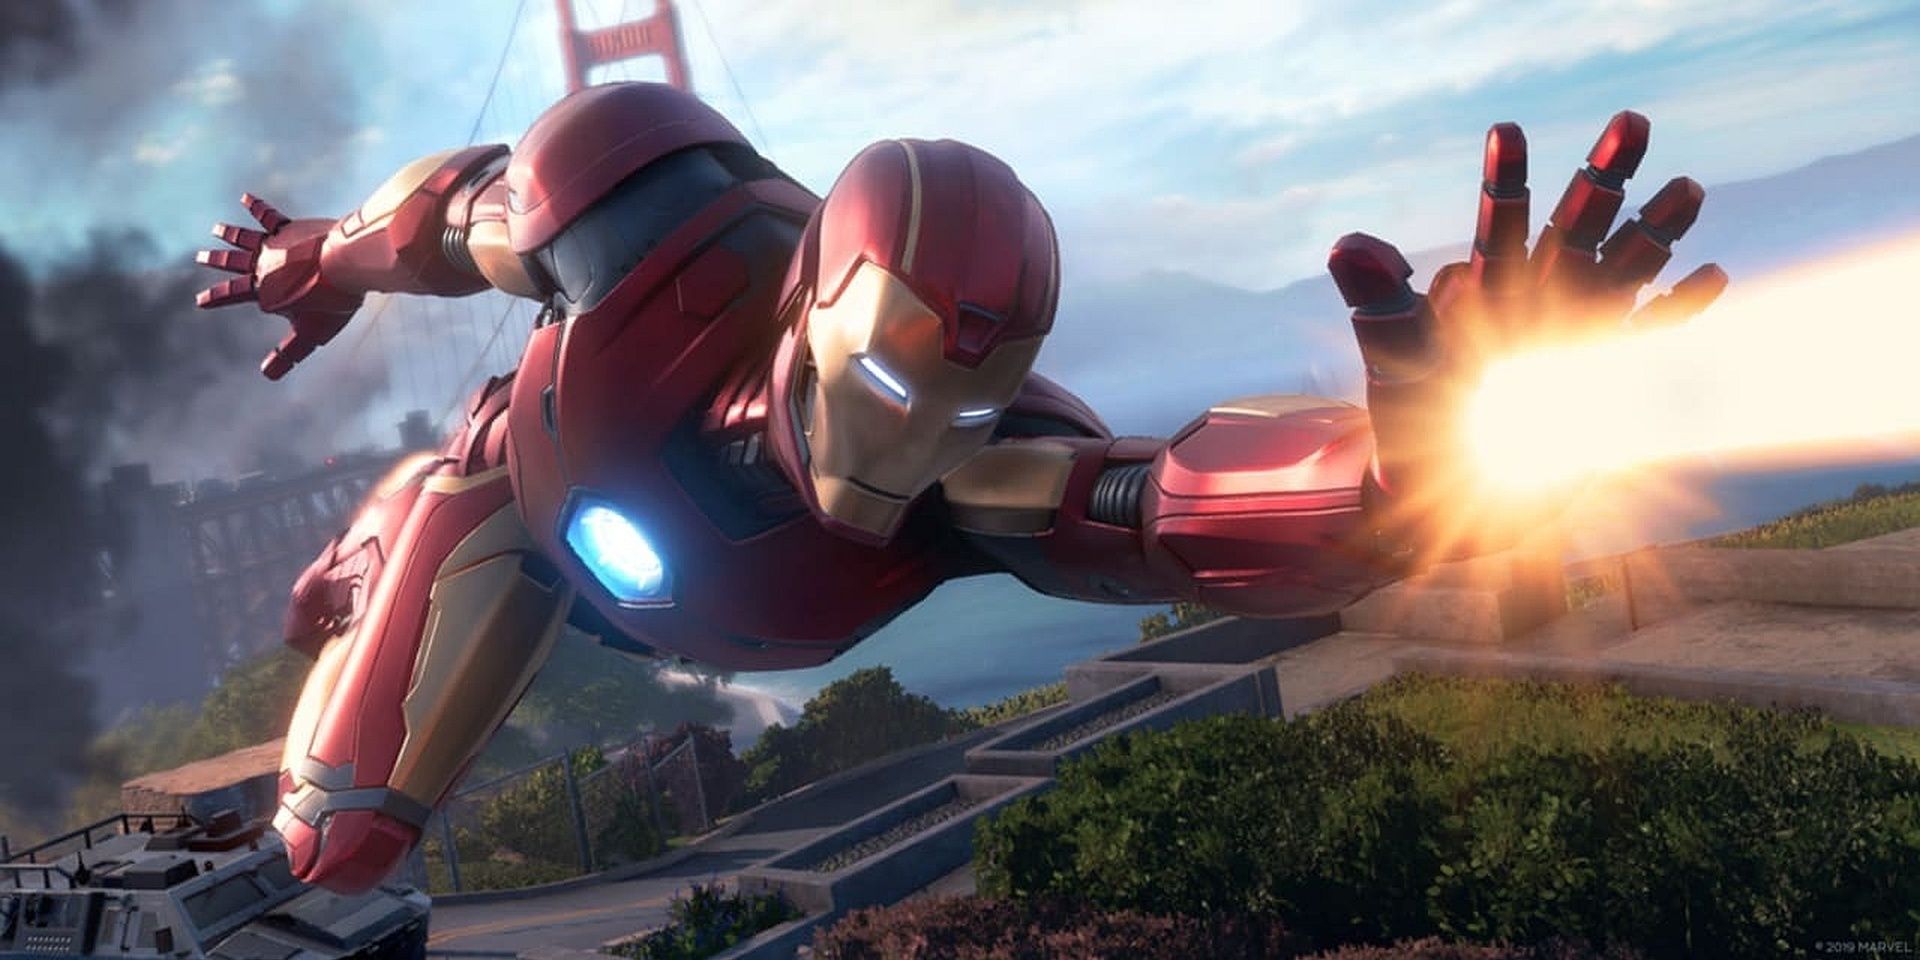 Iron Man cancelled game flying shooting laser